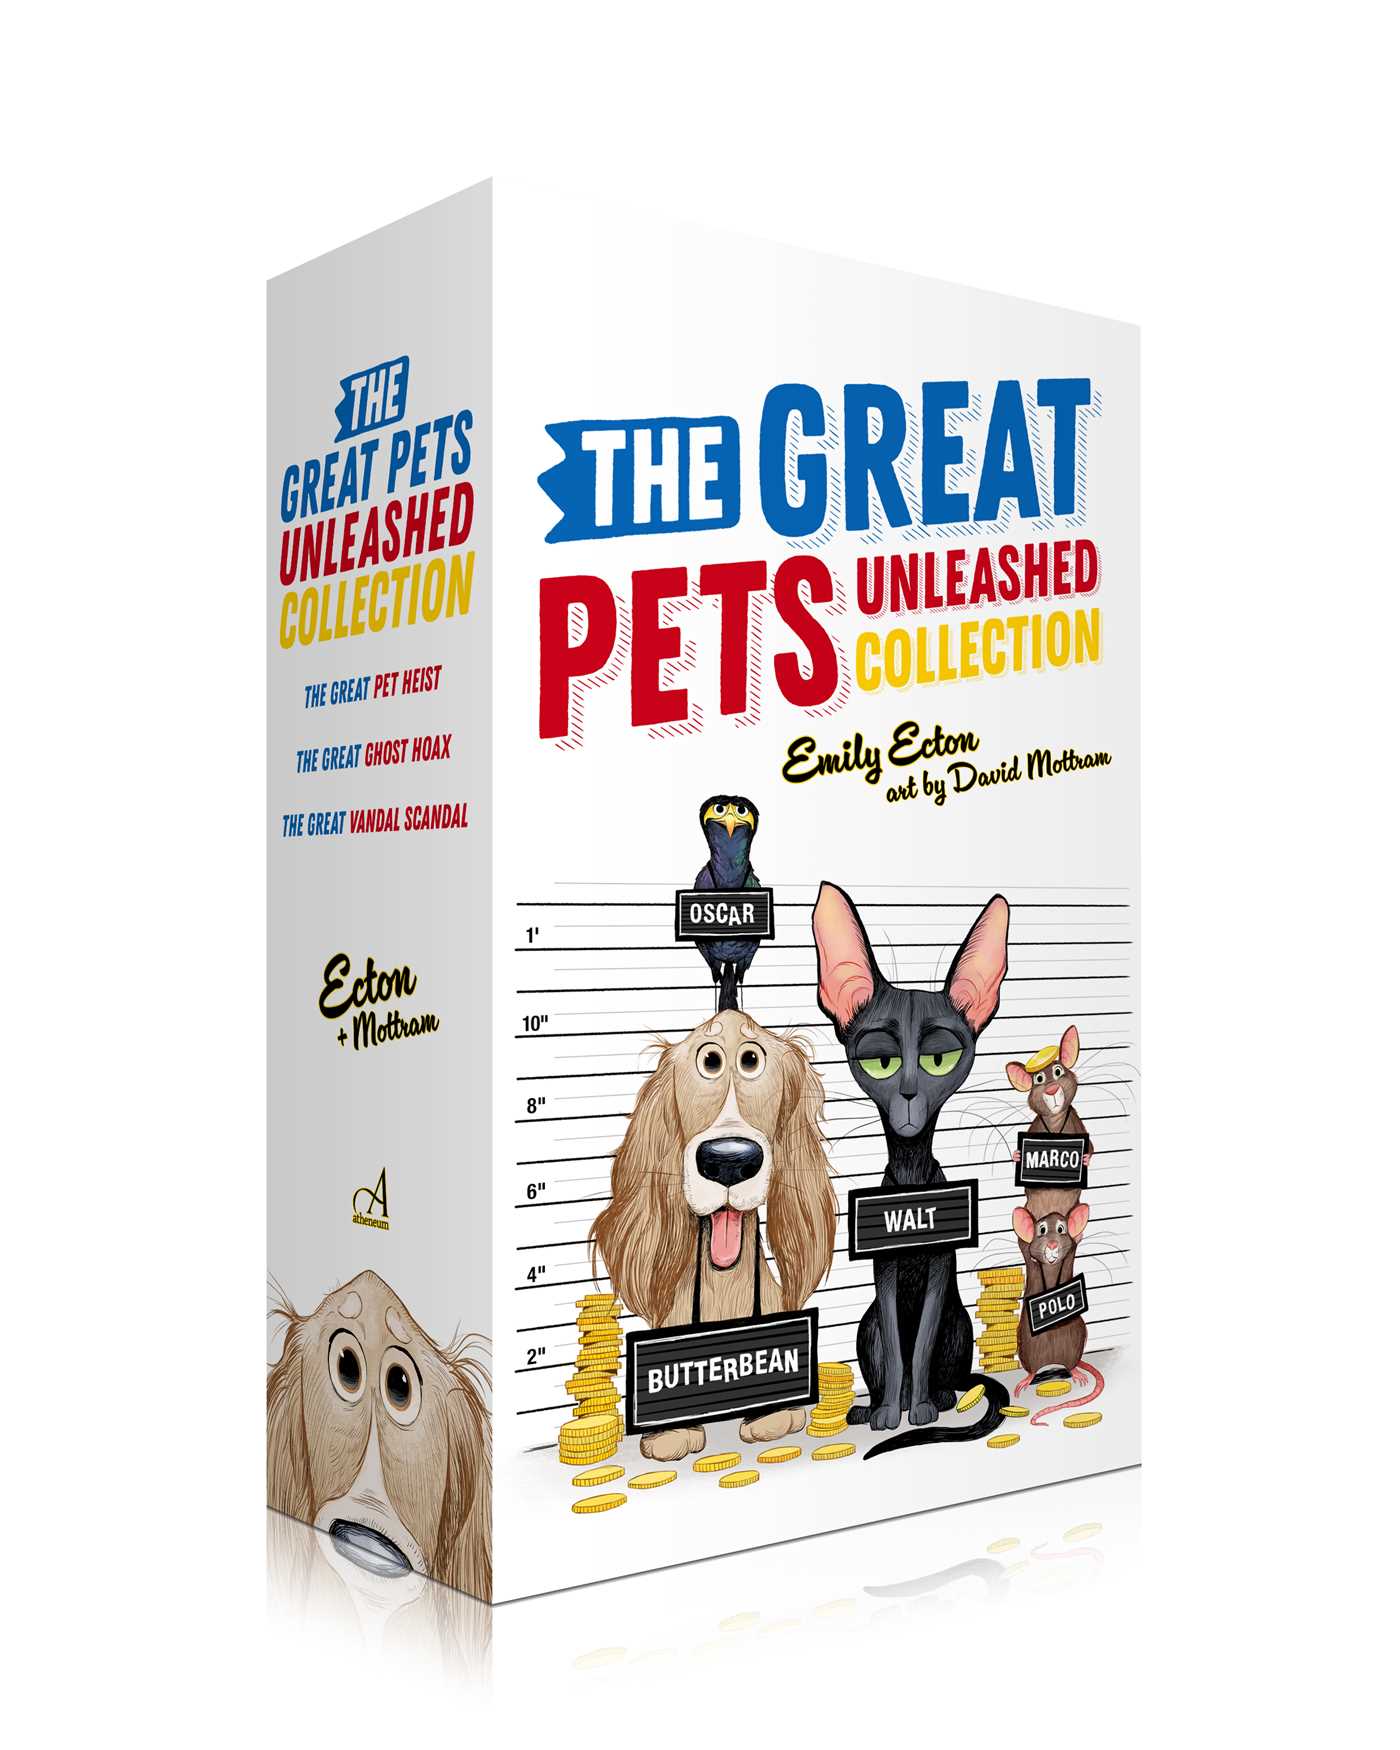 The Great Pets Unleashed Collection